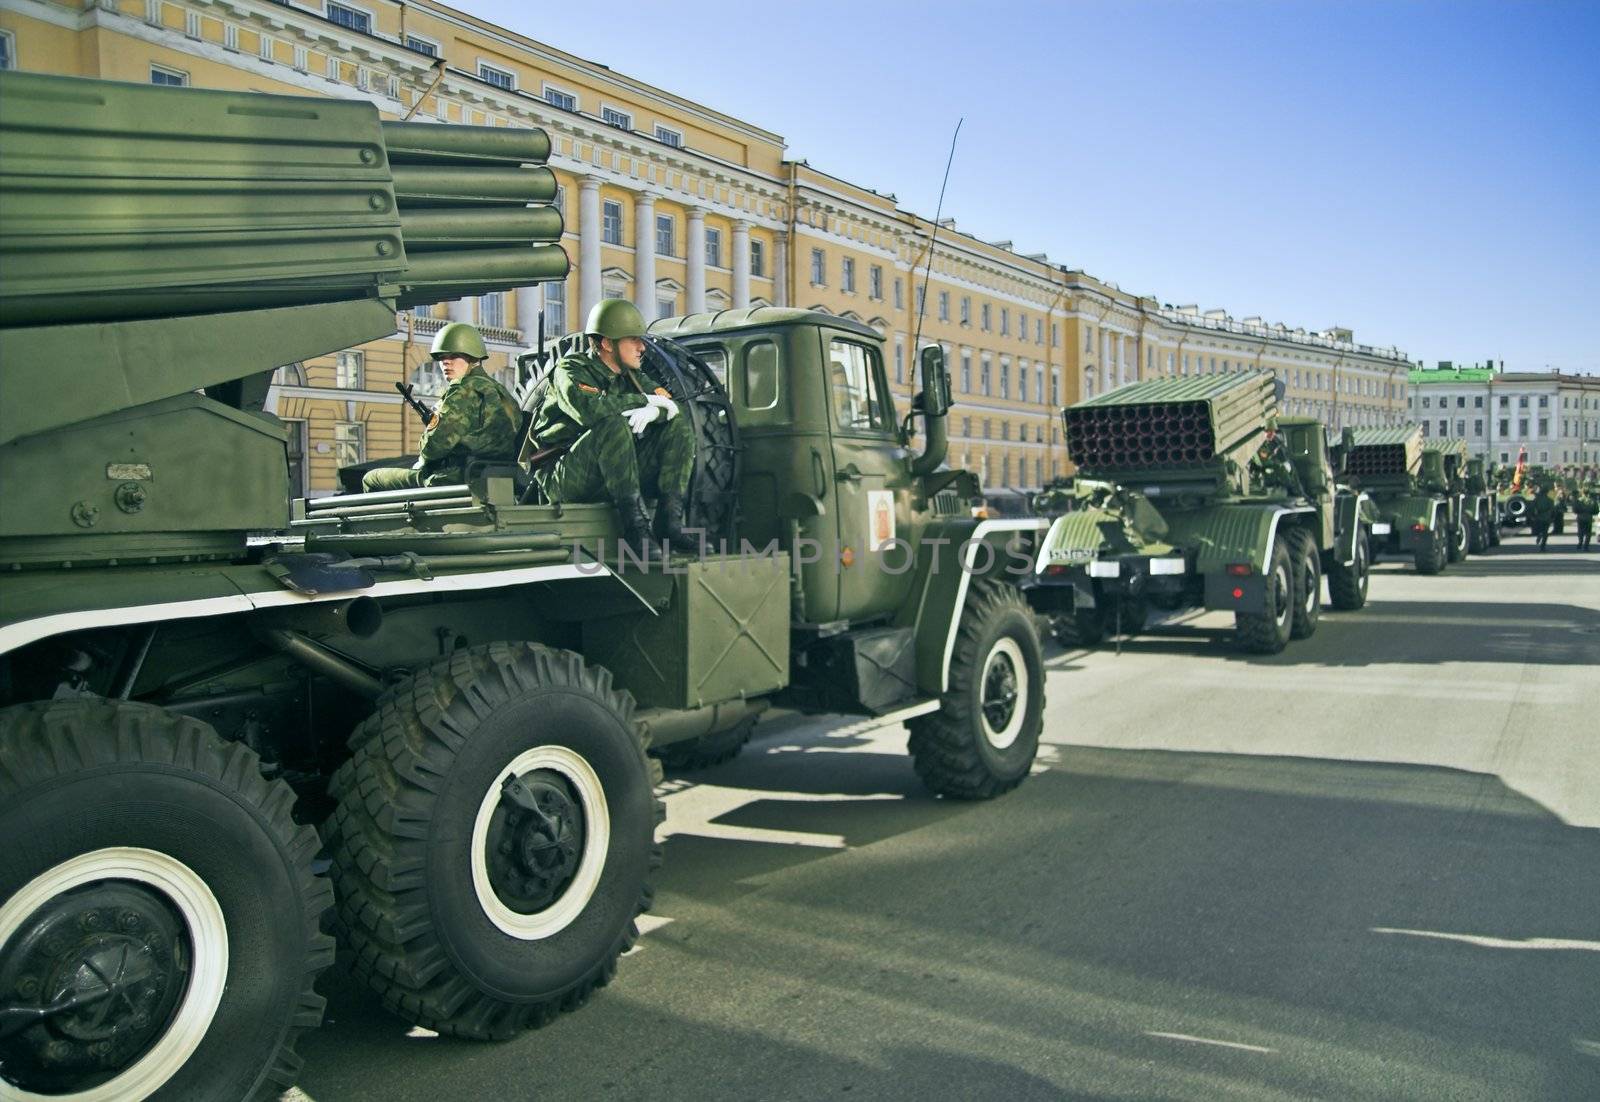 ST PETERSBURG, RUSSIA-MAY 8, 2008: Missile vehicles lined for a rehearsal before the celebration of World War II Victory Day on May 9, 2008.